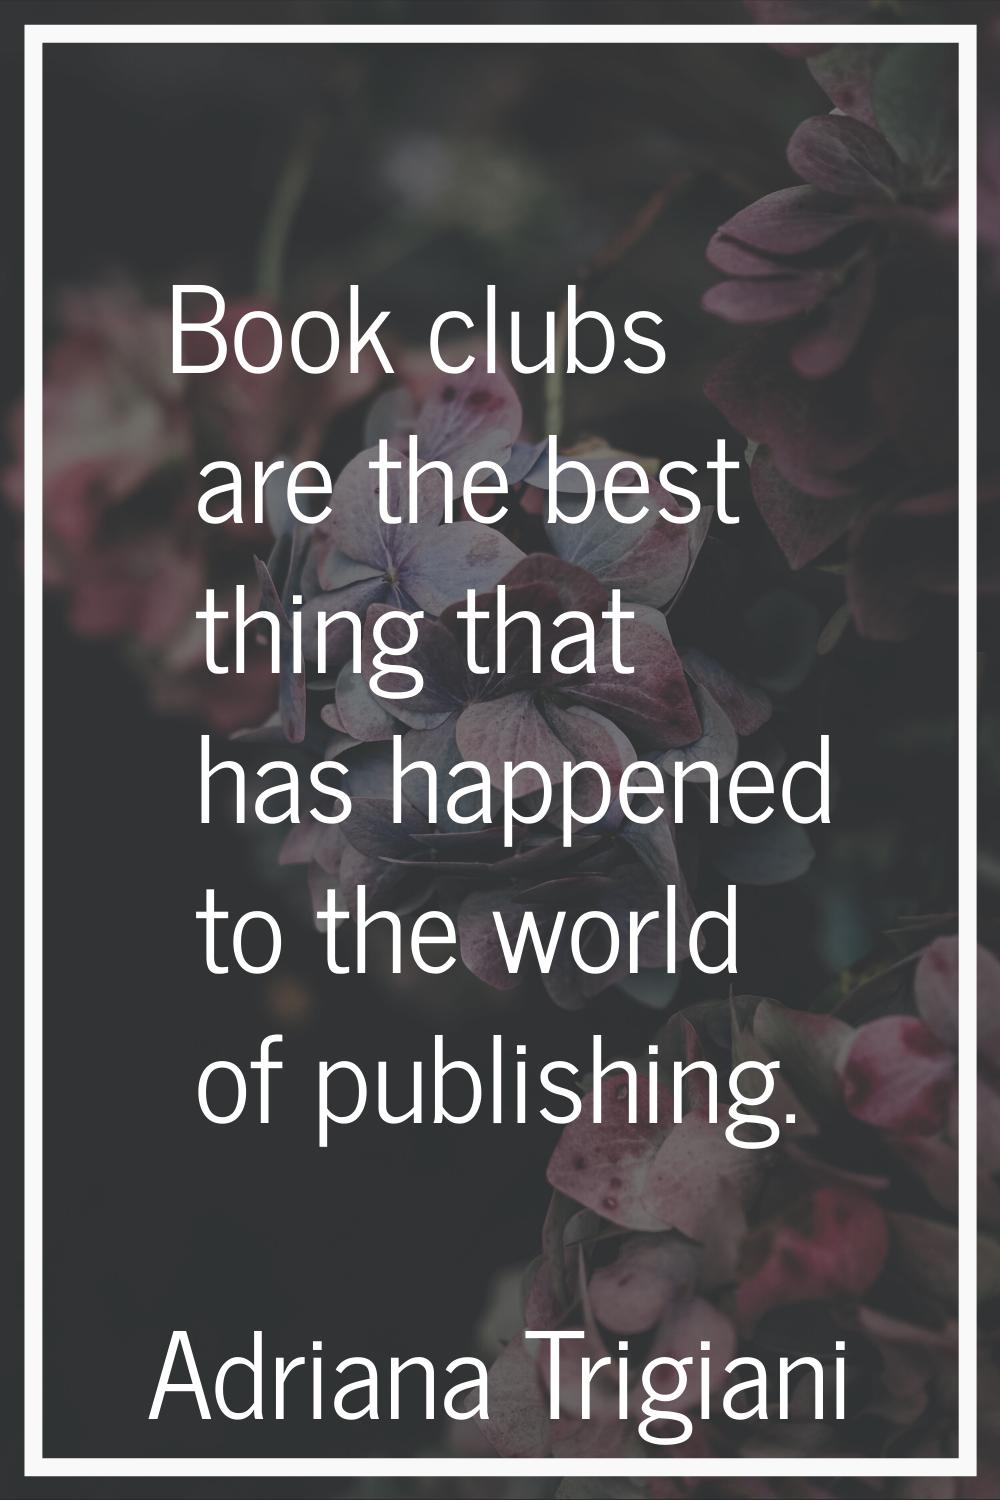 Book clubs are the best thing that has happened to the world of publishing.